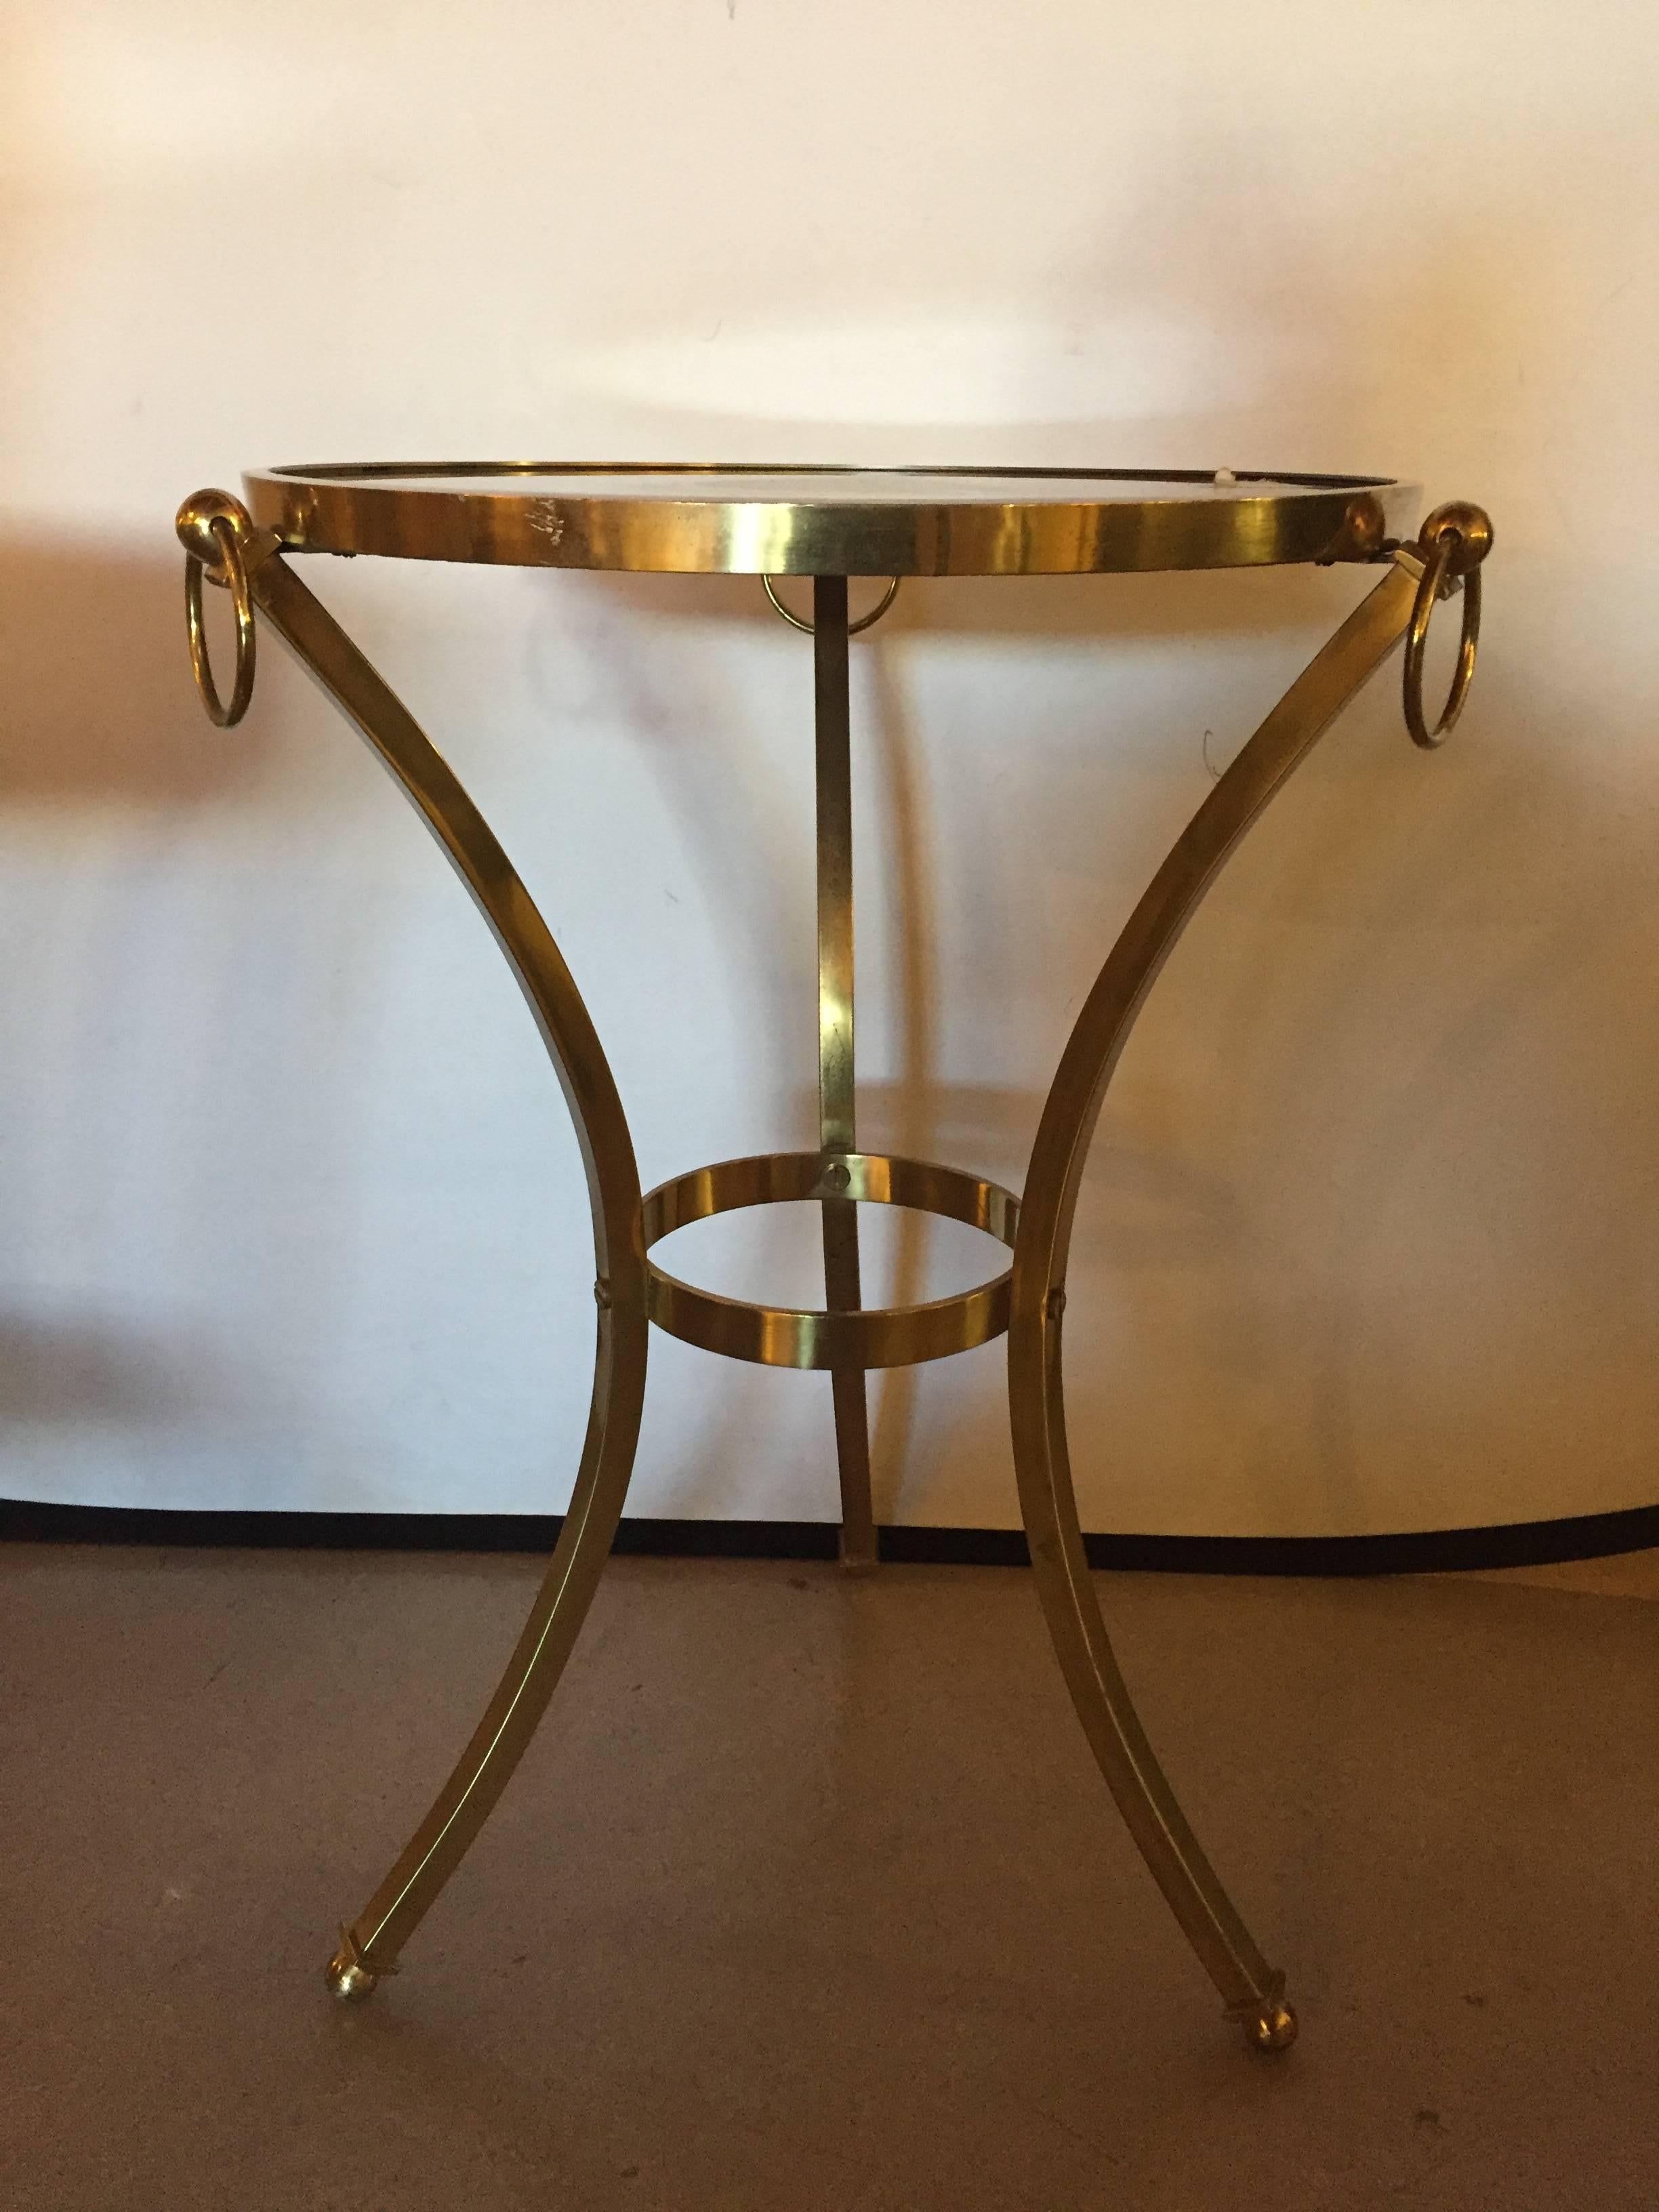 Small brass Hollywood Regency gueridon table with glass top. Typical in form and style comes this inexpensively priced end or gueridon table having an ebony glass top supported by a brass apron having ti-pod stand with circular form on the top and